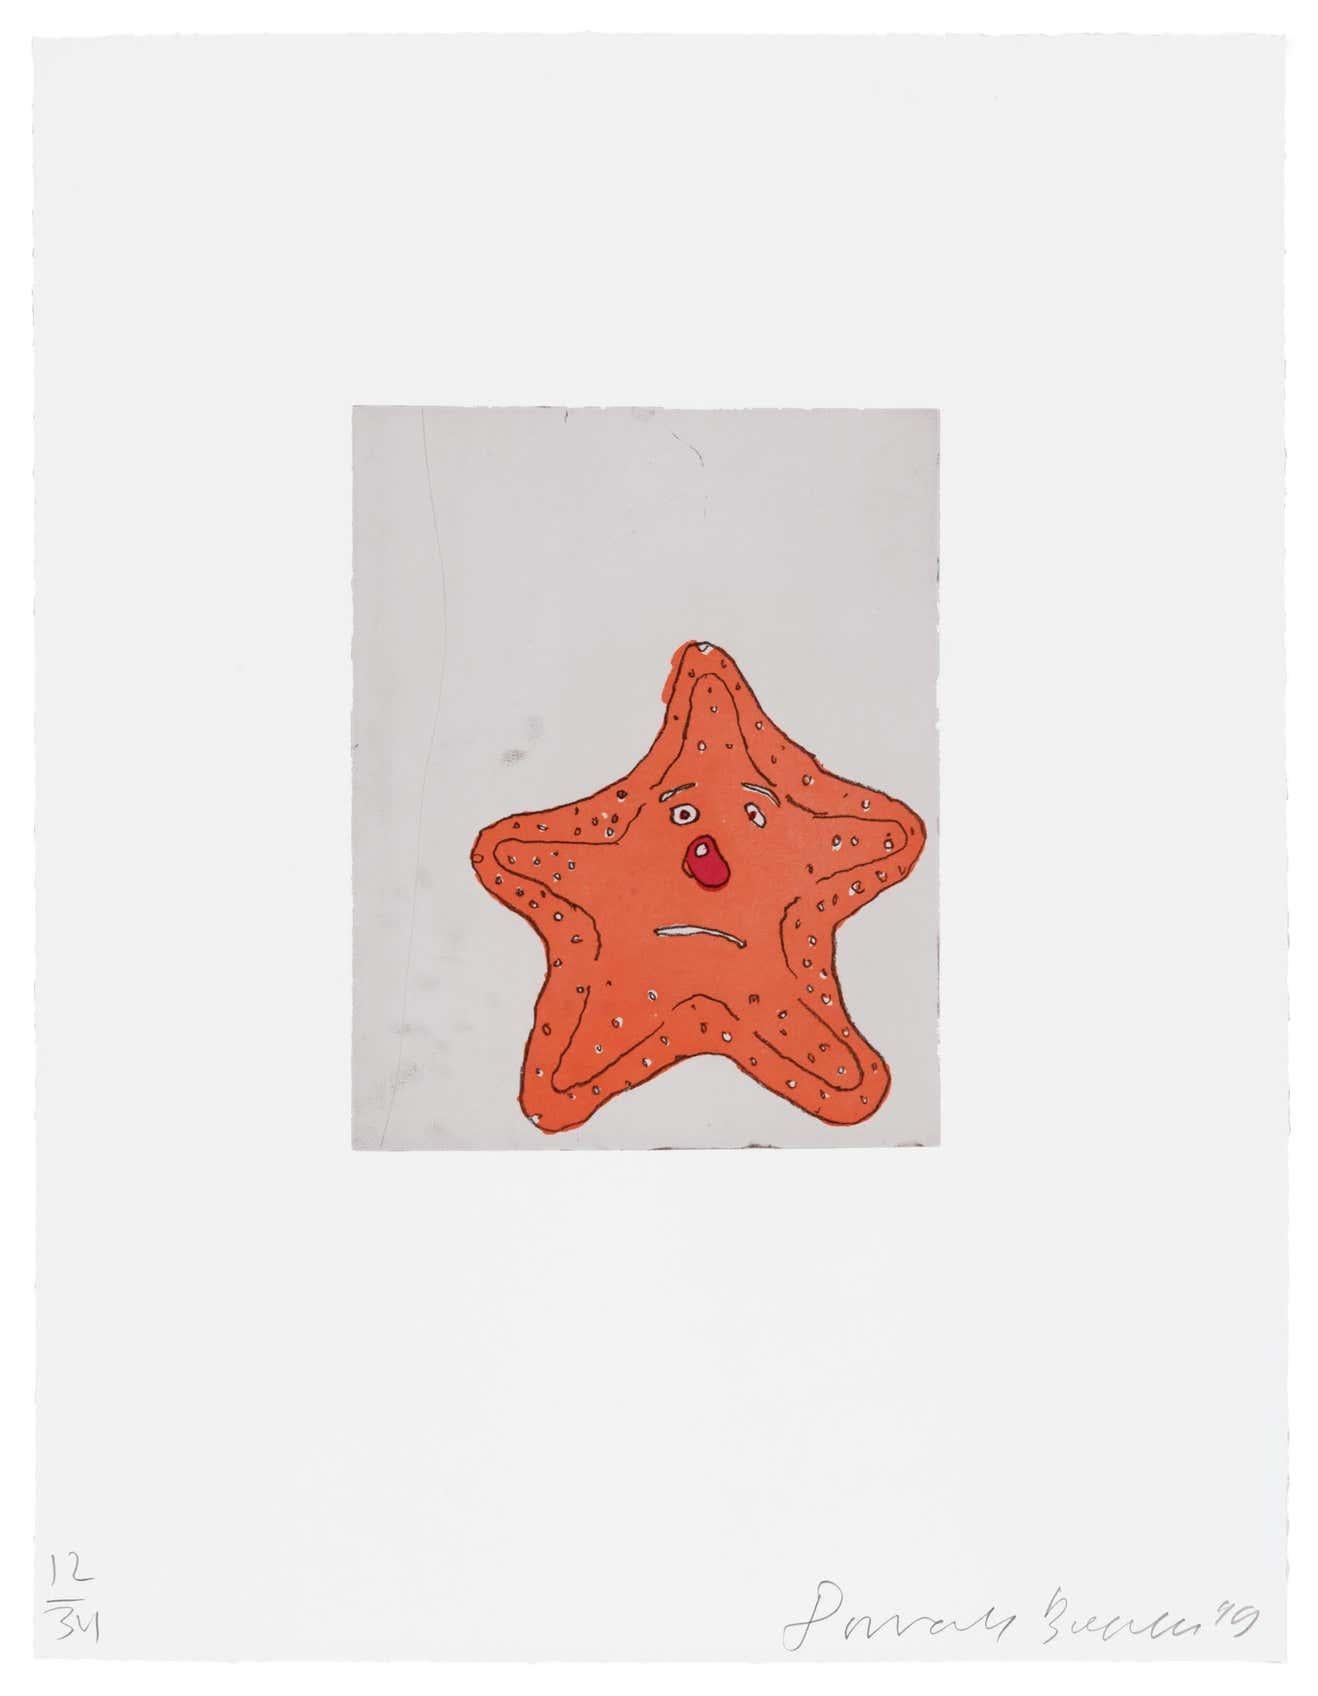 Donald Baechler, Starfish, 1999:
A fun, whimsical, and highly decorative signed limited edition Baechler piece that works well in any setting.  
 
Medium: Soft-ground etching and aquatint on Magnani Pescia paper.
Overall size including boarders: 22